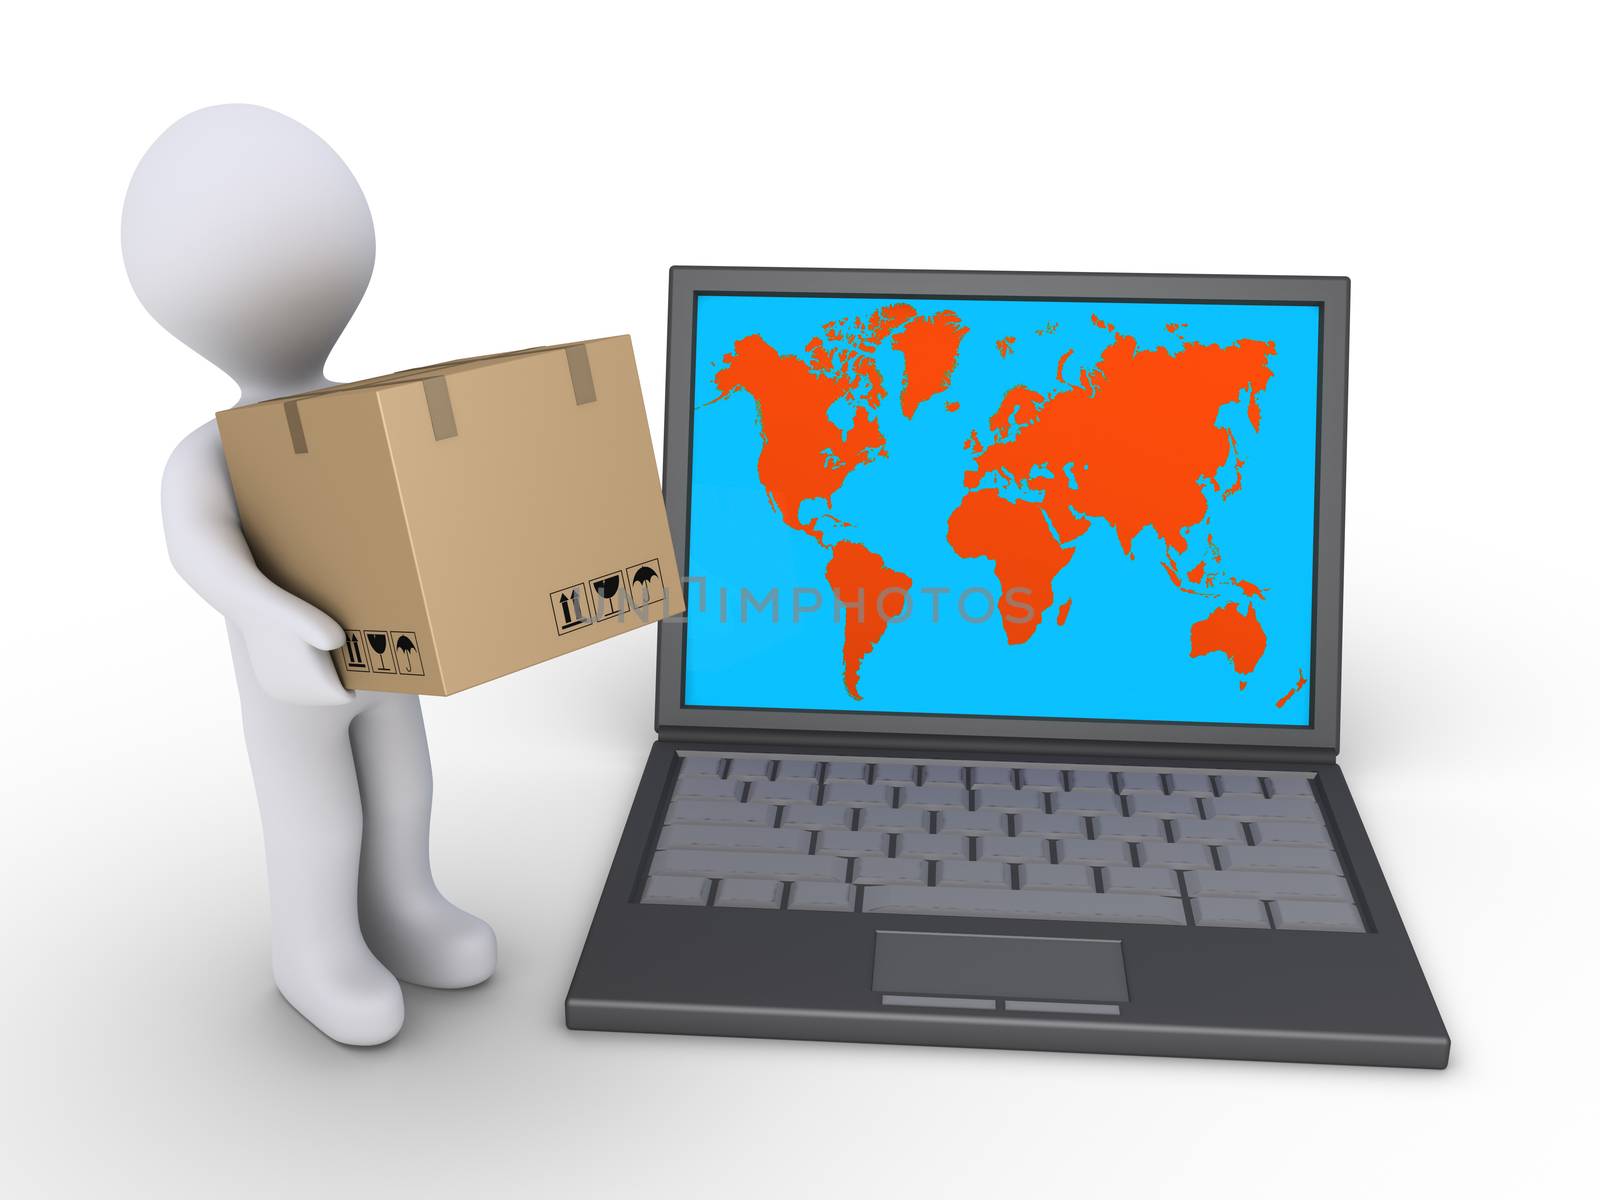 3d person holding a cardboard box is beside a laptop with the world map